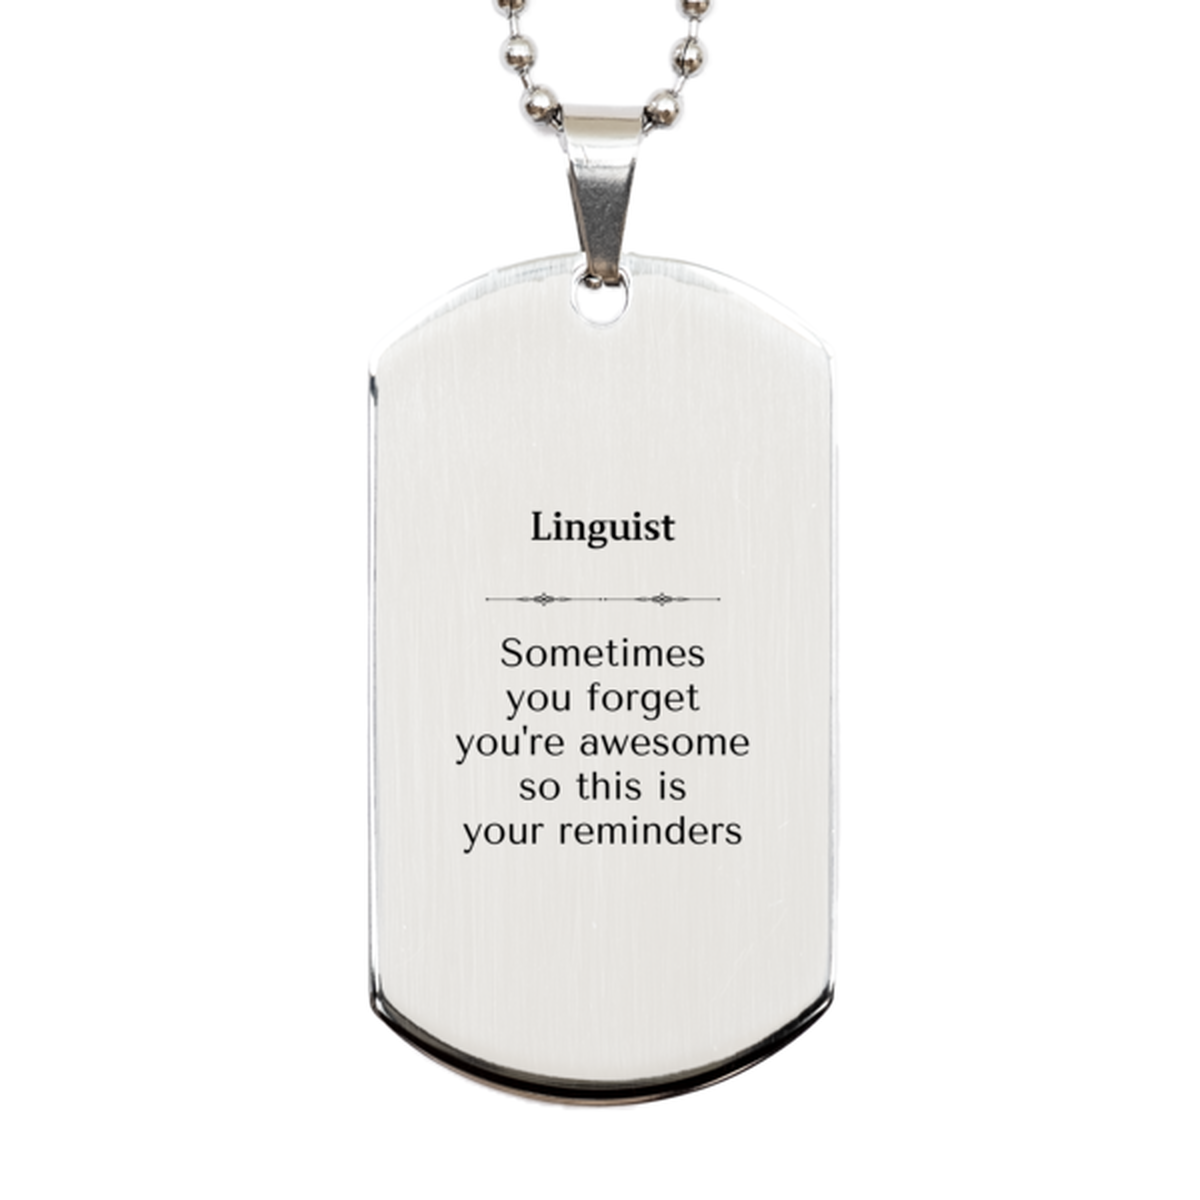 Sentimental Linguist Silver Dog Tag, Linguist Sometimes you forget you're awesome so this is your reminders, Graduation Christmas Birthday Gifts for Linguist, Men, Women, Coworkers